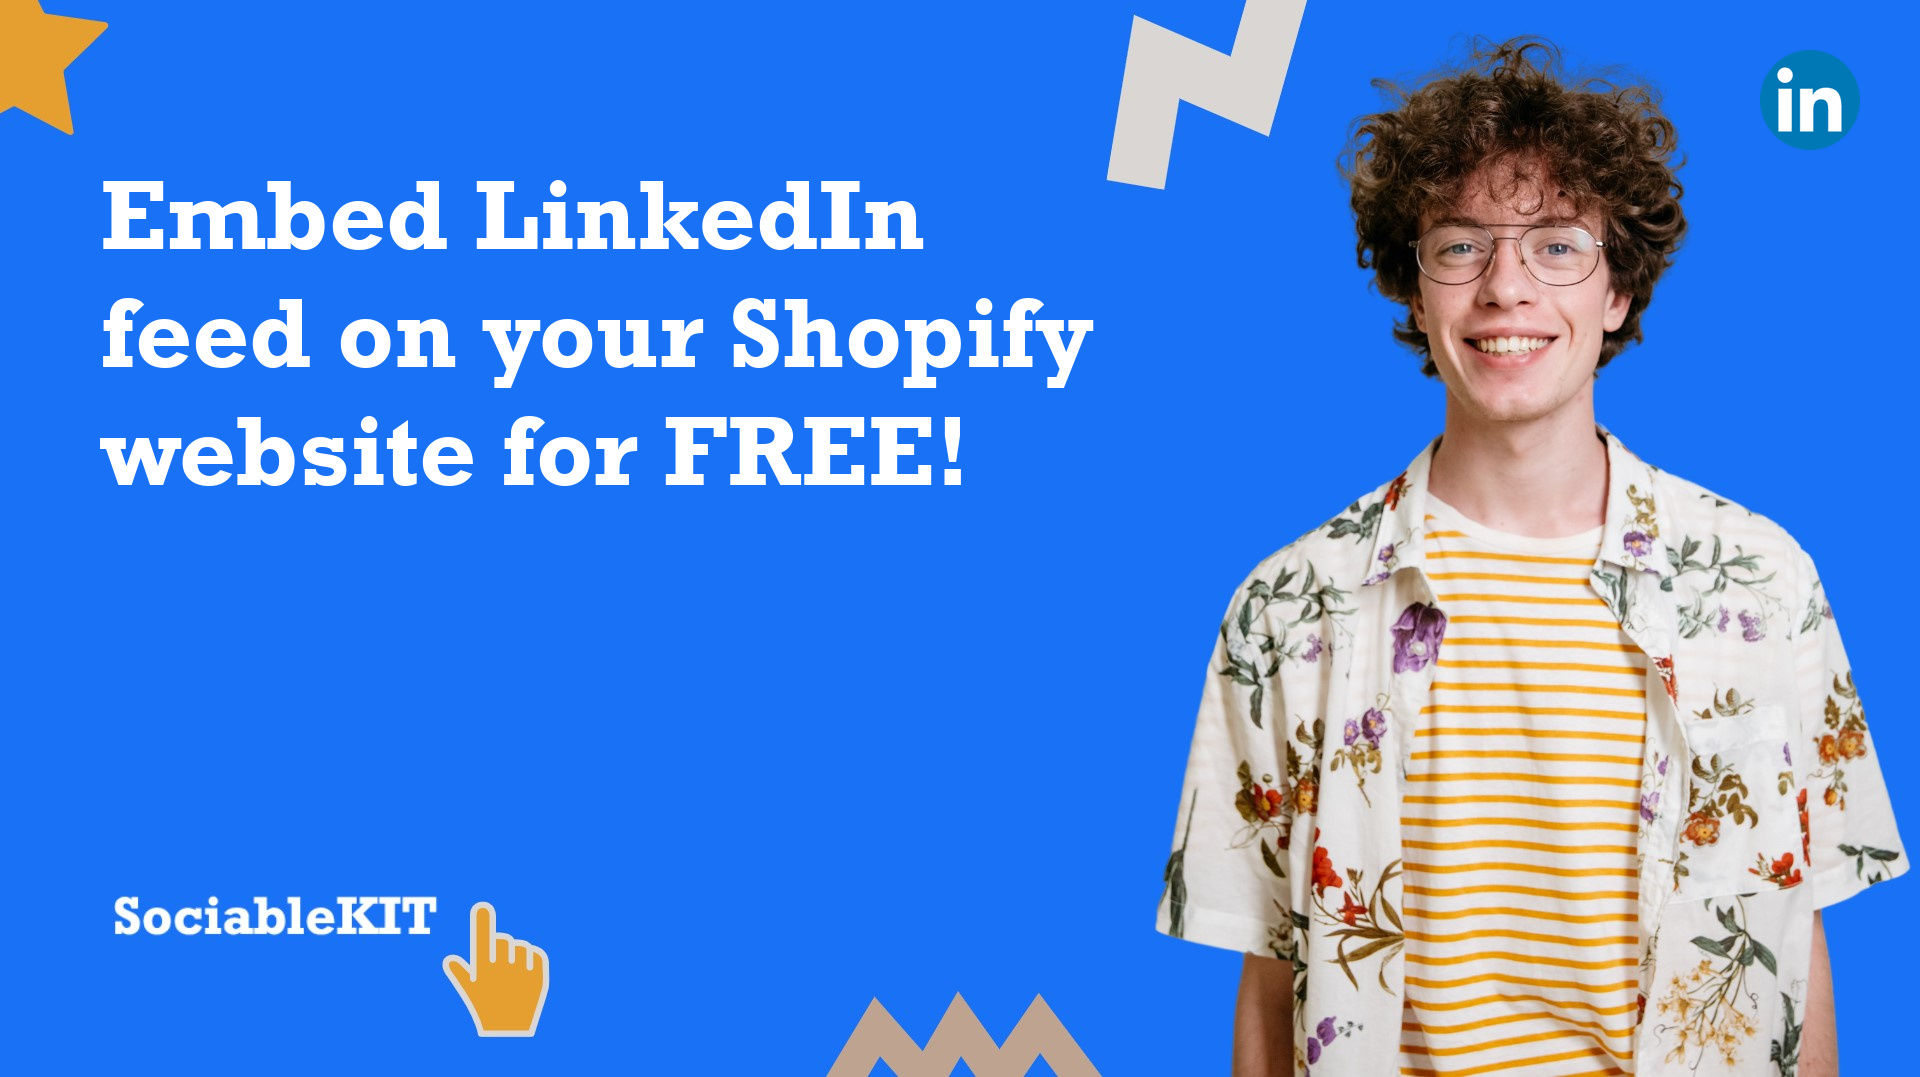 How to embed LinkedIn feed on your Shopify website for FREE?